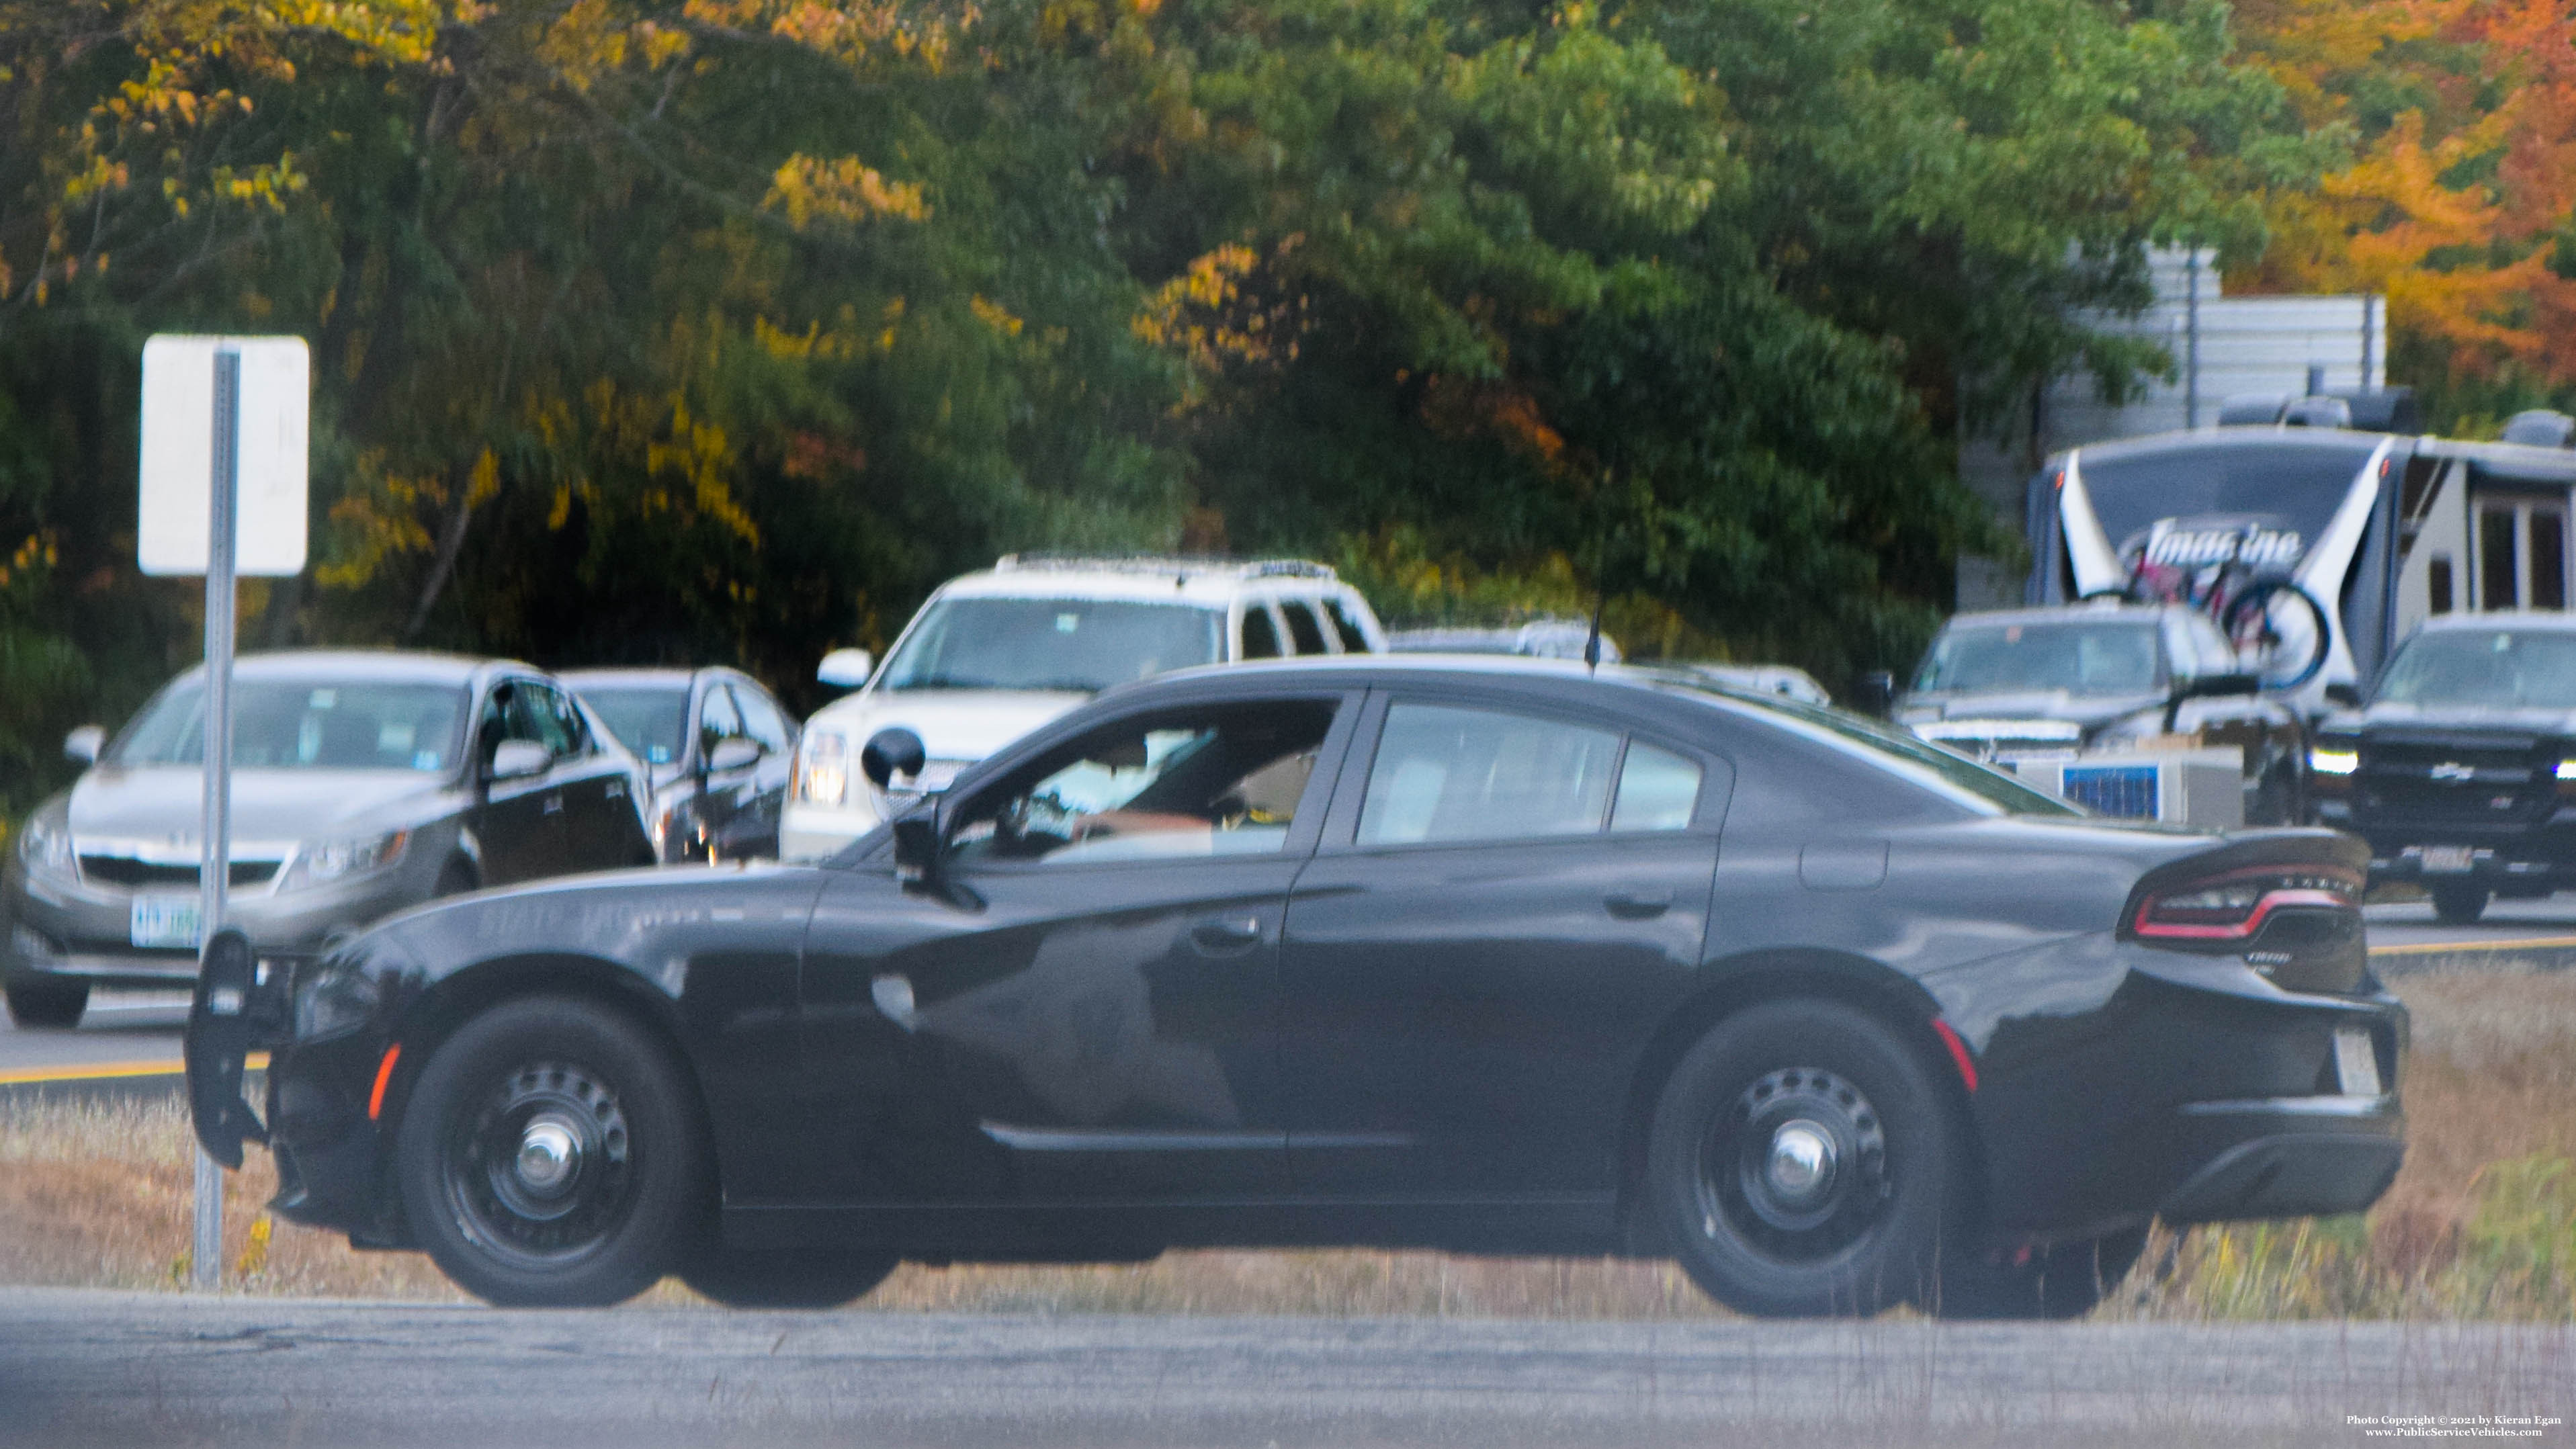 A photo  of New Hampshire State Police
            Cruiser 415, a 2015-2019 Dodge Charger             taken by Kieran Egan